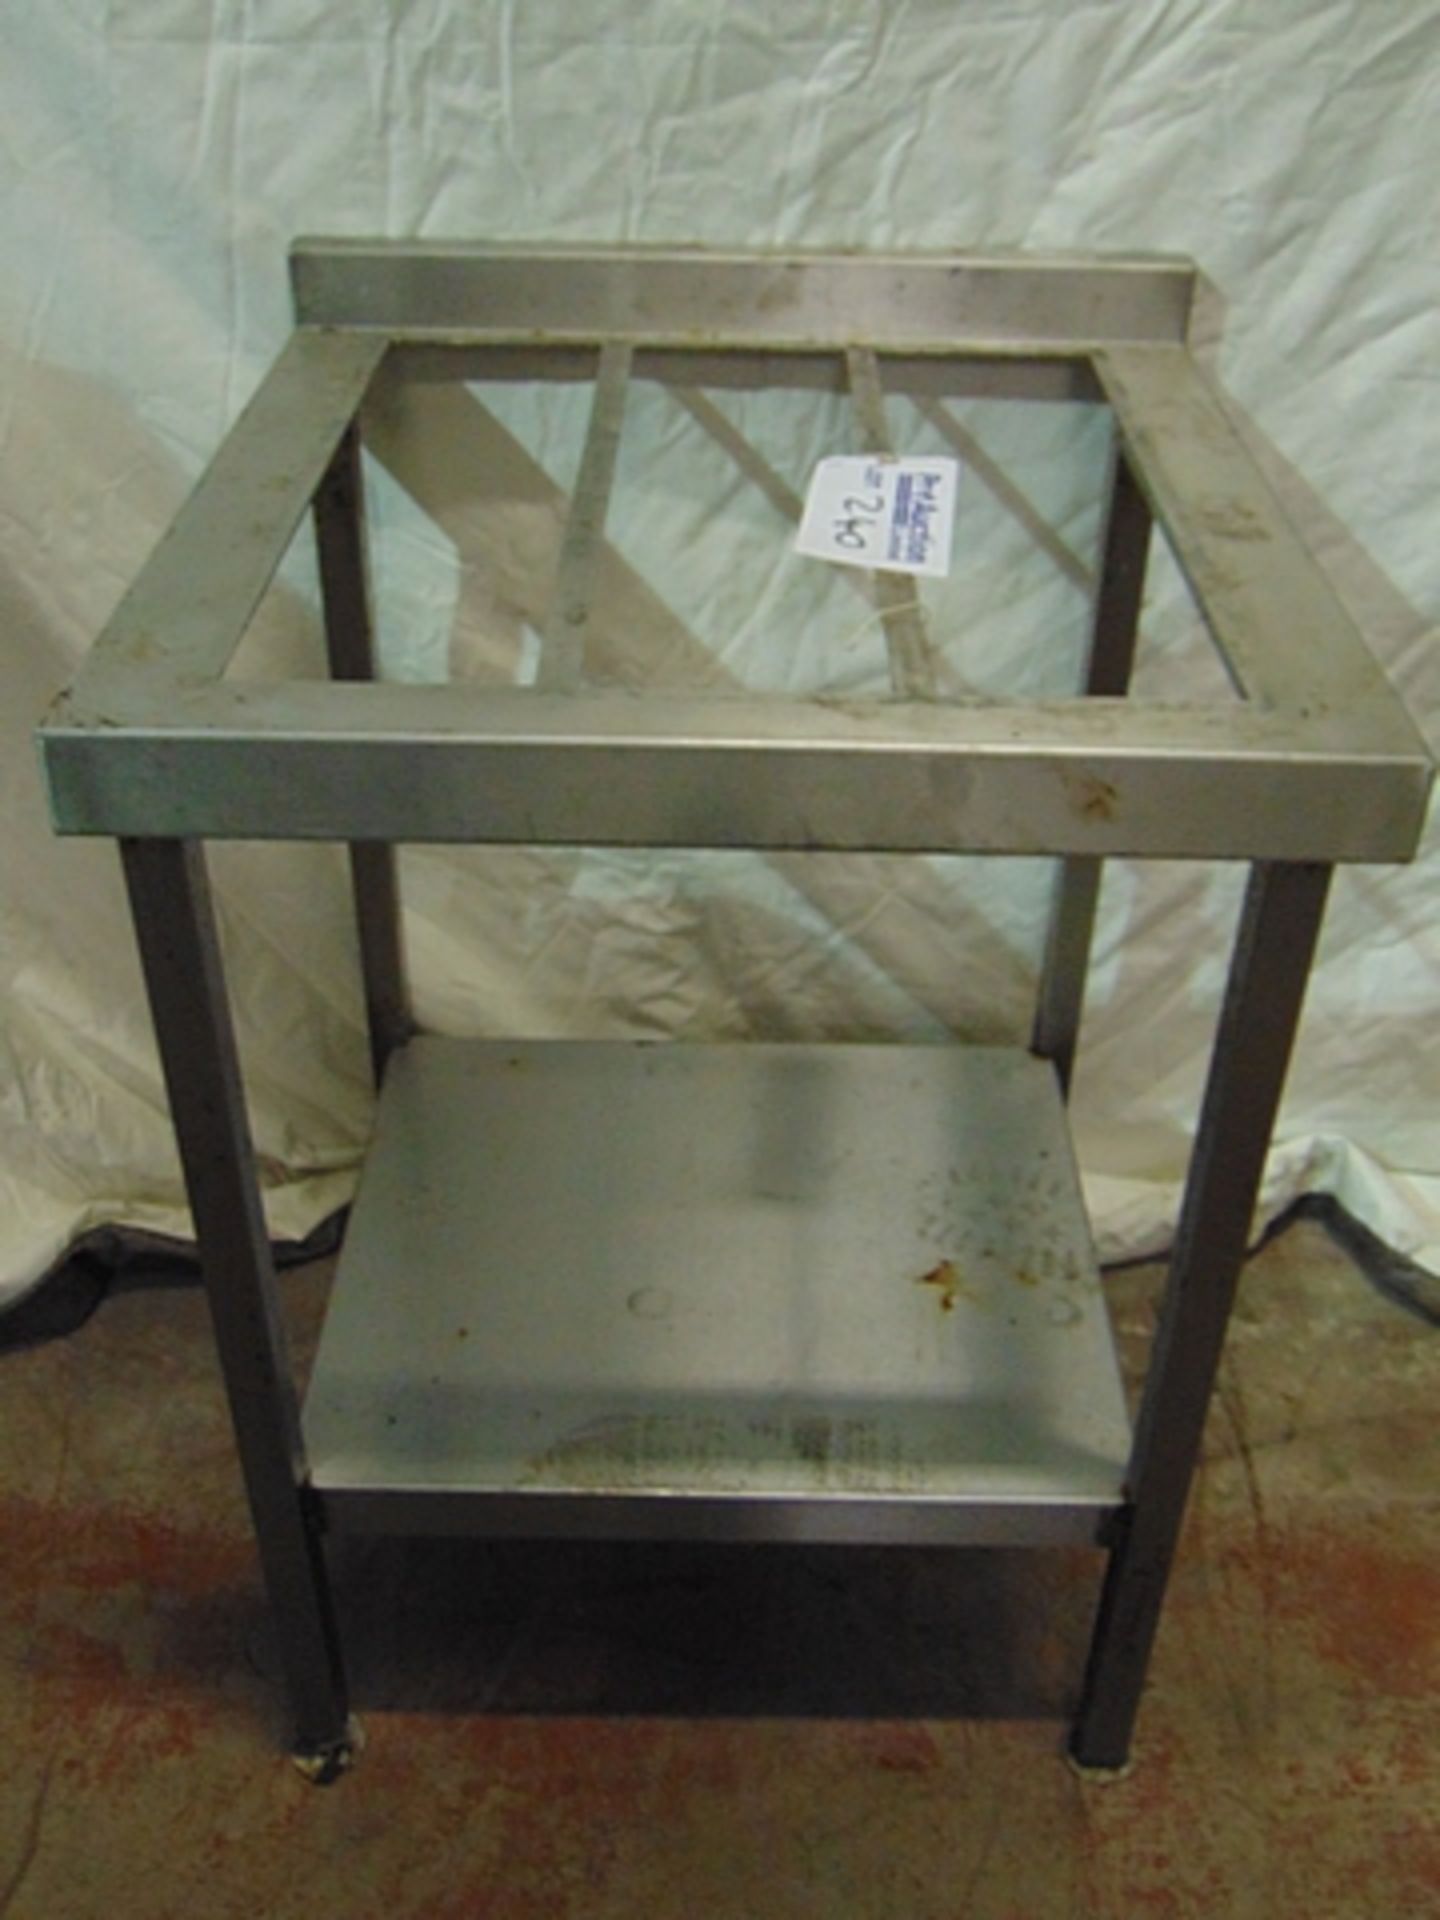 Stainless steel preparation table frame no top 600mm x 600mm x 790mm STK10259-166